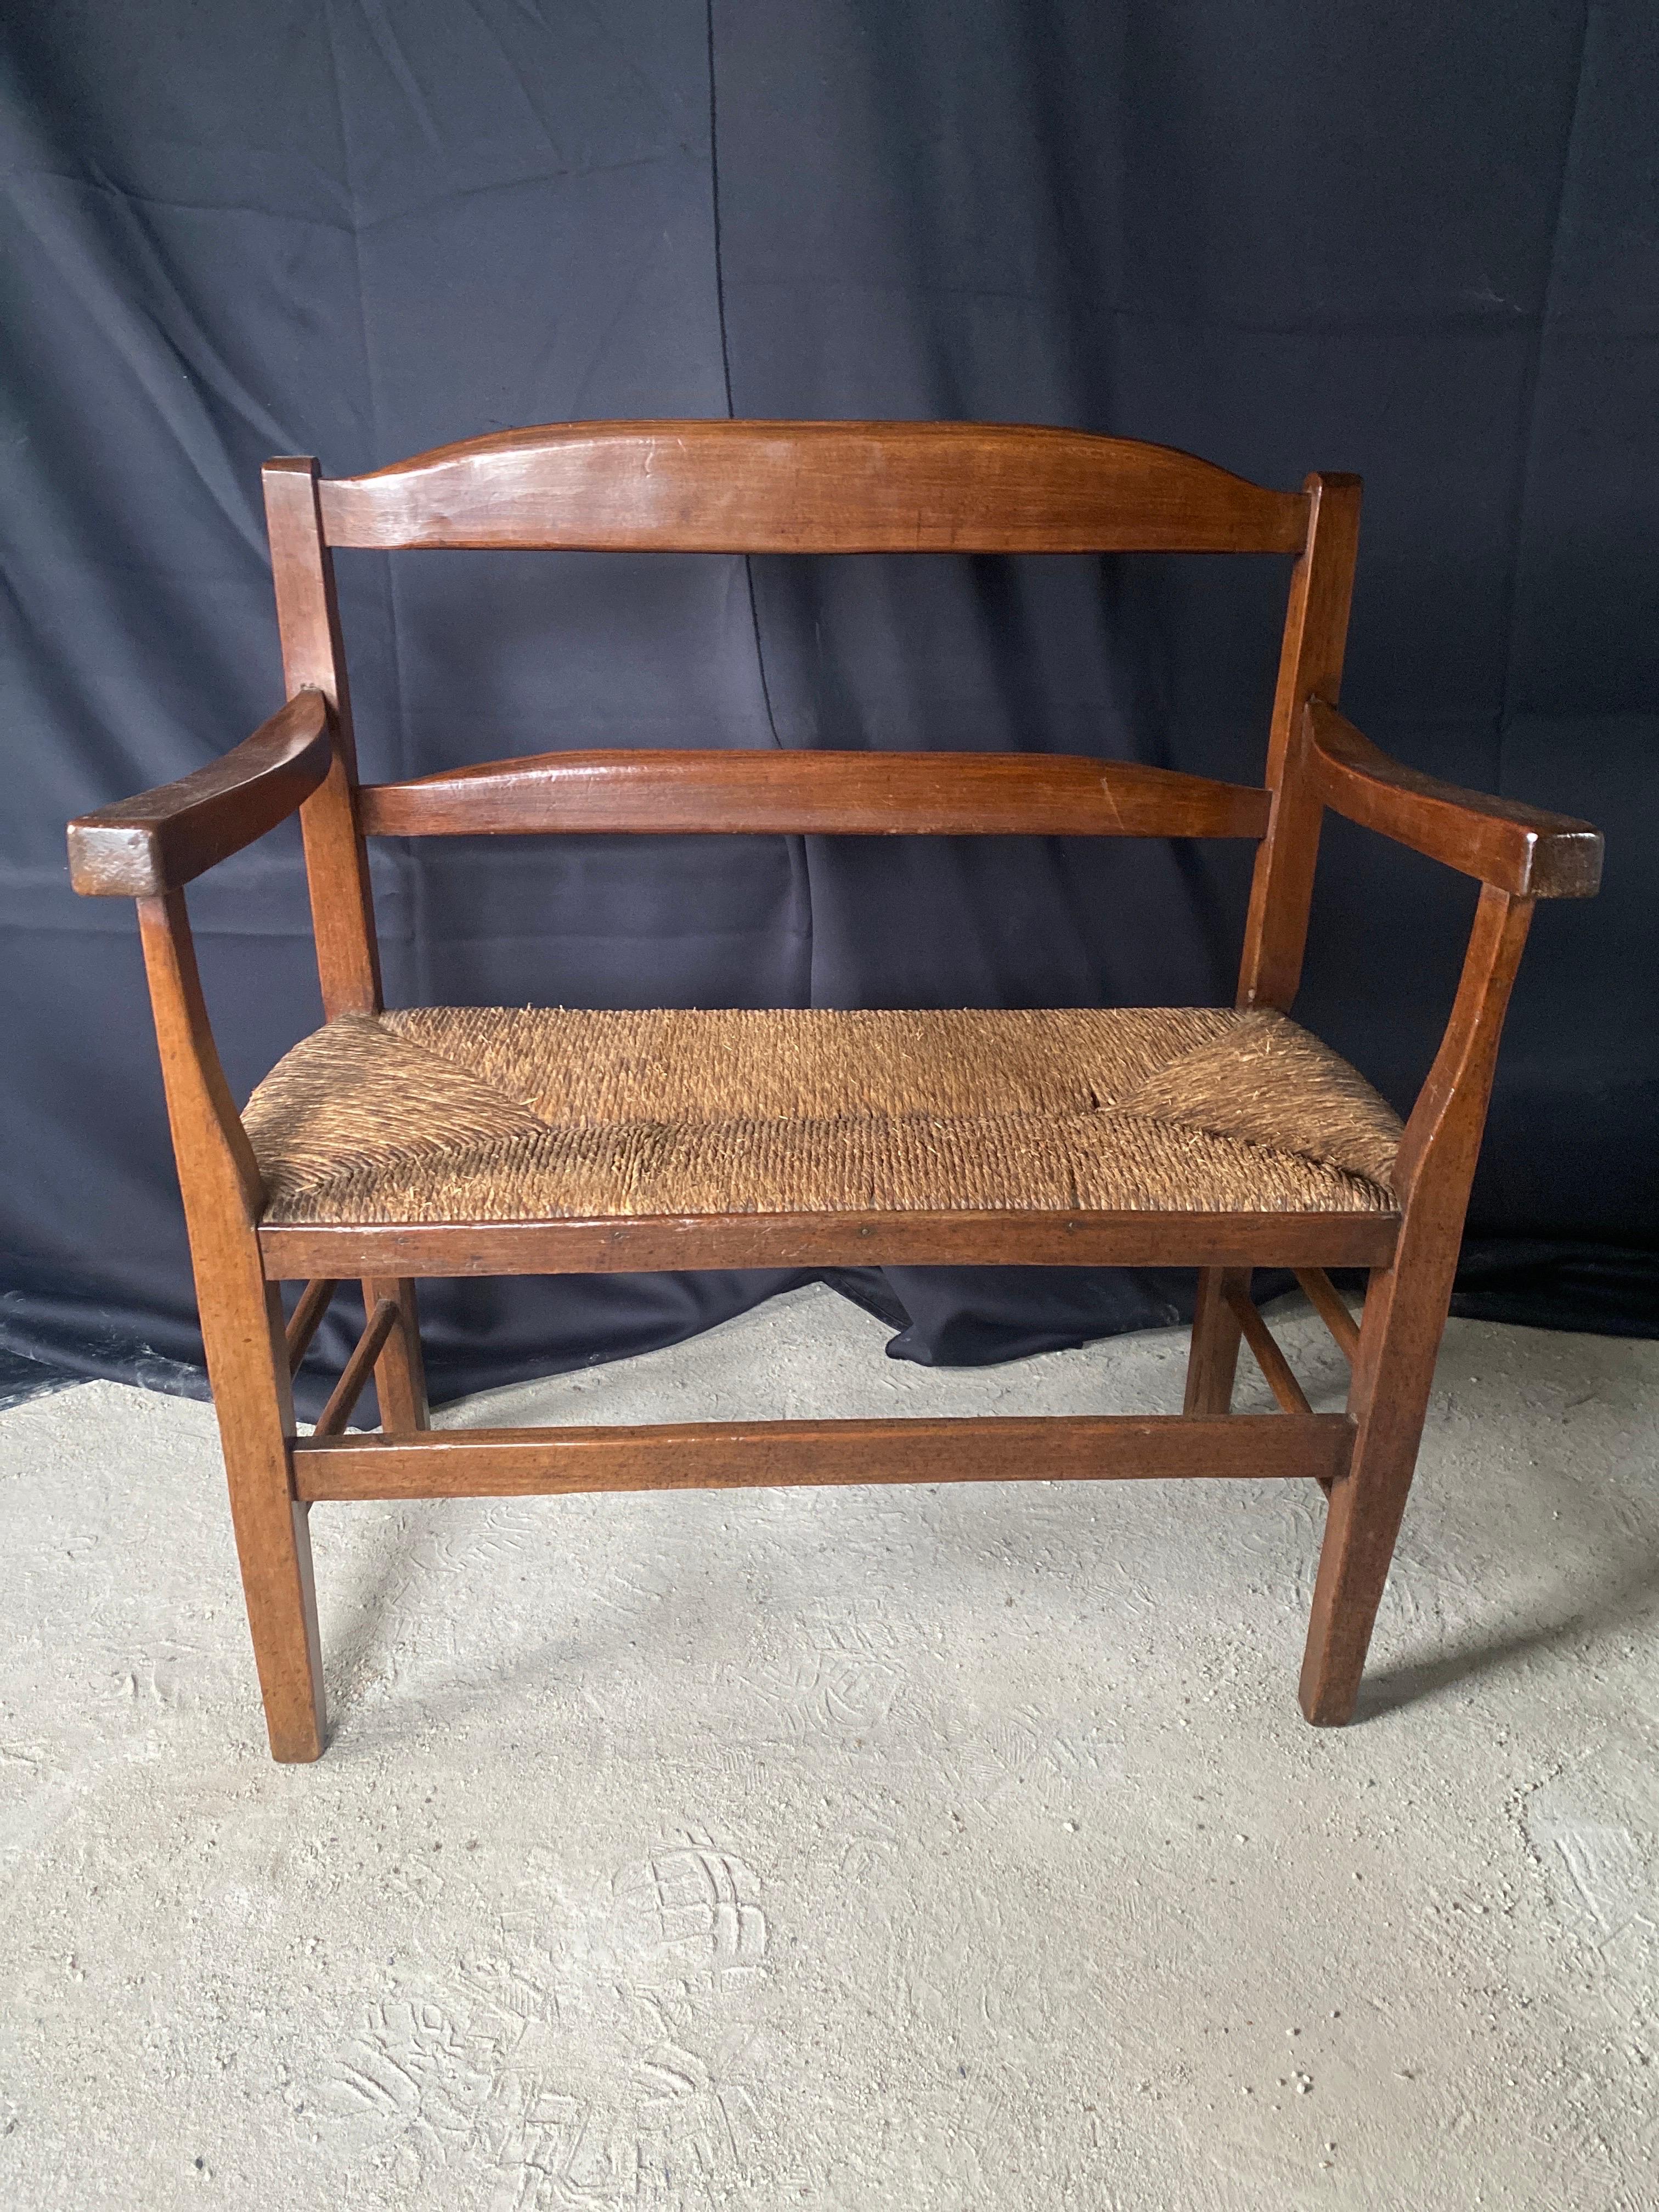 splendid little fireplace bench (cantou) in walnut dating from the 19th century, original mulch and in good condition beautiful little model easy to put in your home due to the small size of this pretty piece of furniture